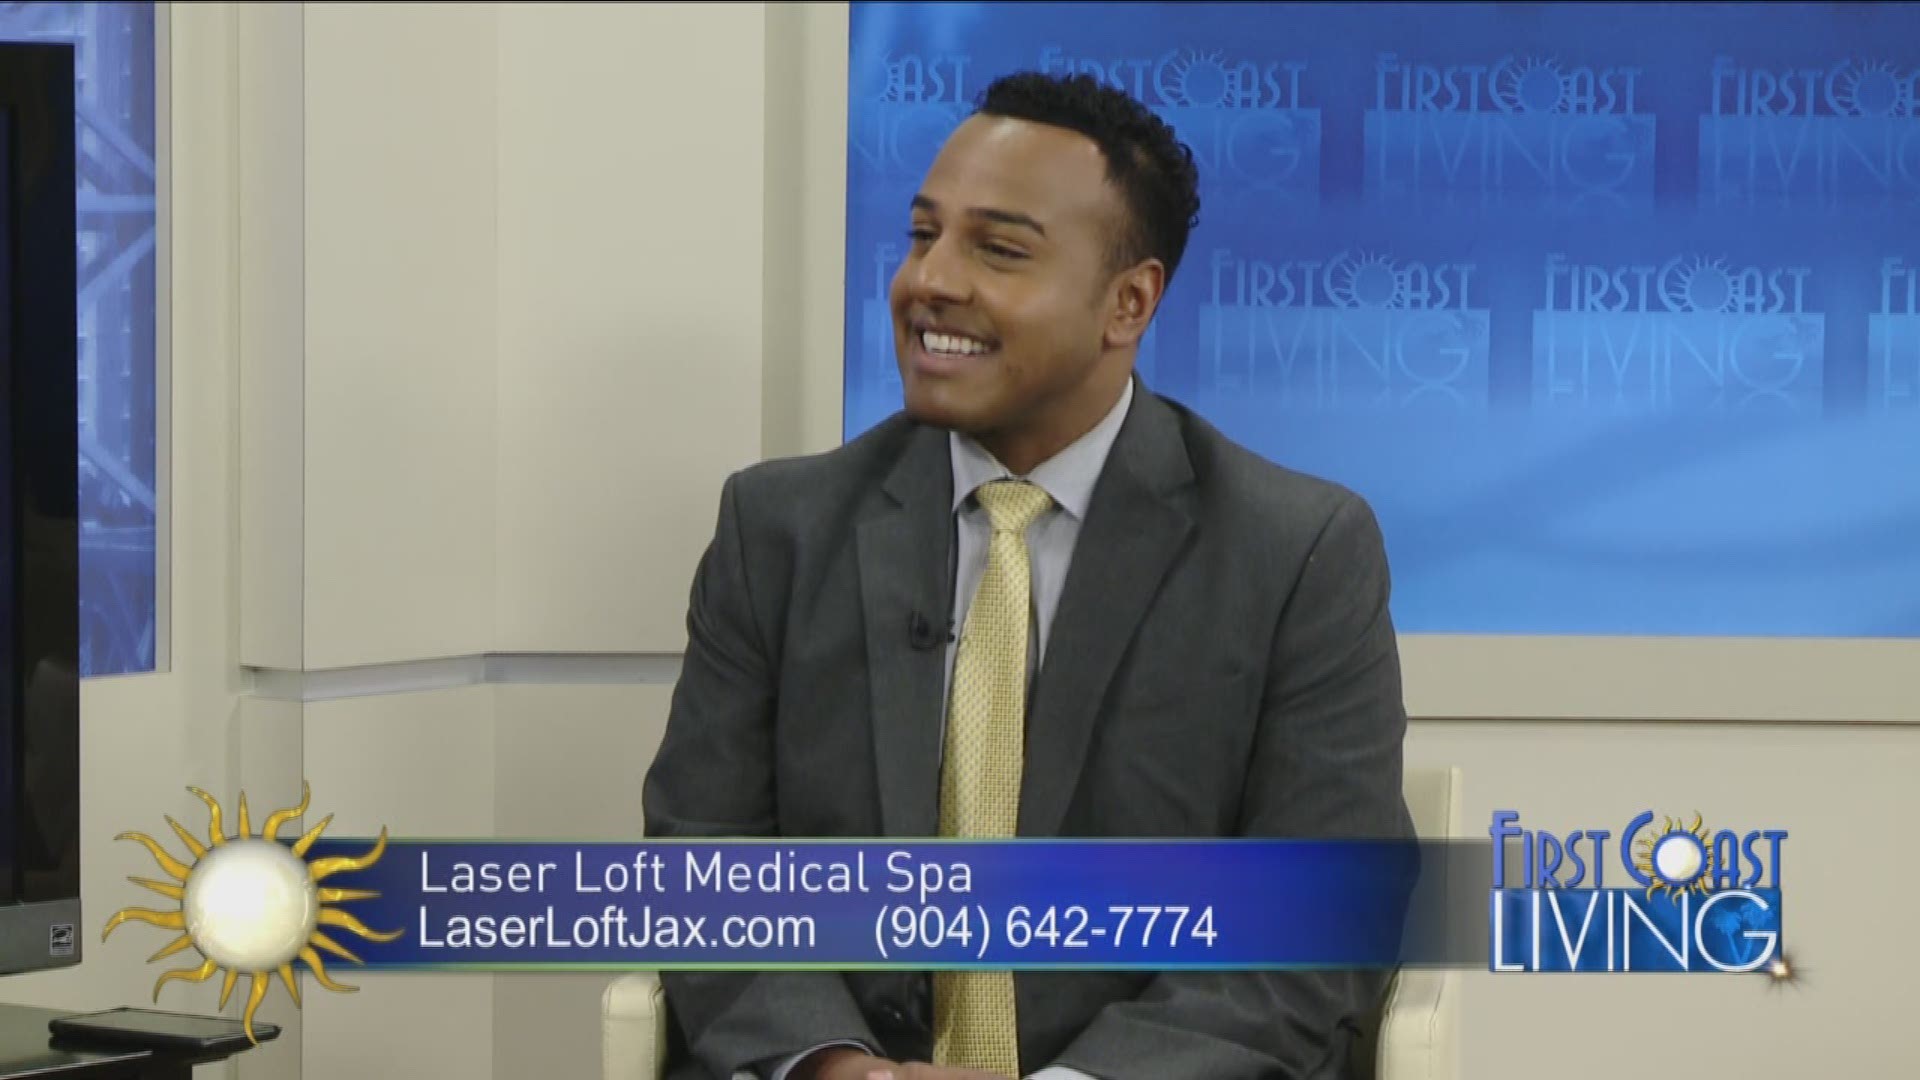 Using Lasers to treat unwanted fat.